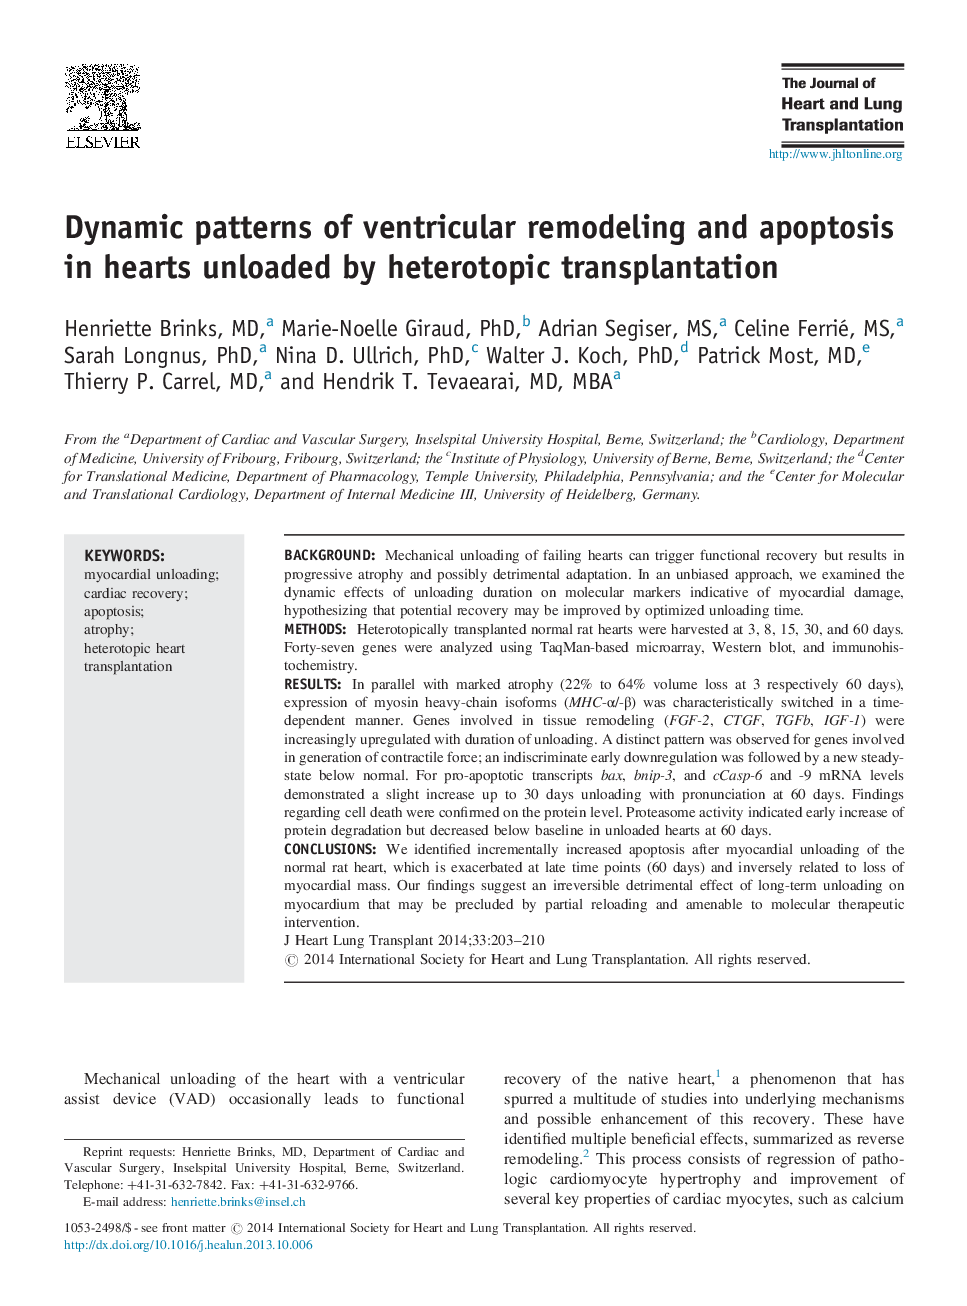 Dynamic patterns of ventricular remodeling and apoptosis in hearts unloaded by heterotopic transplantation